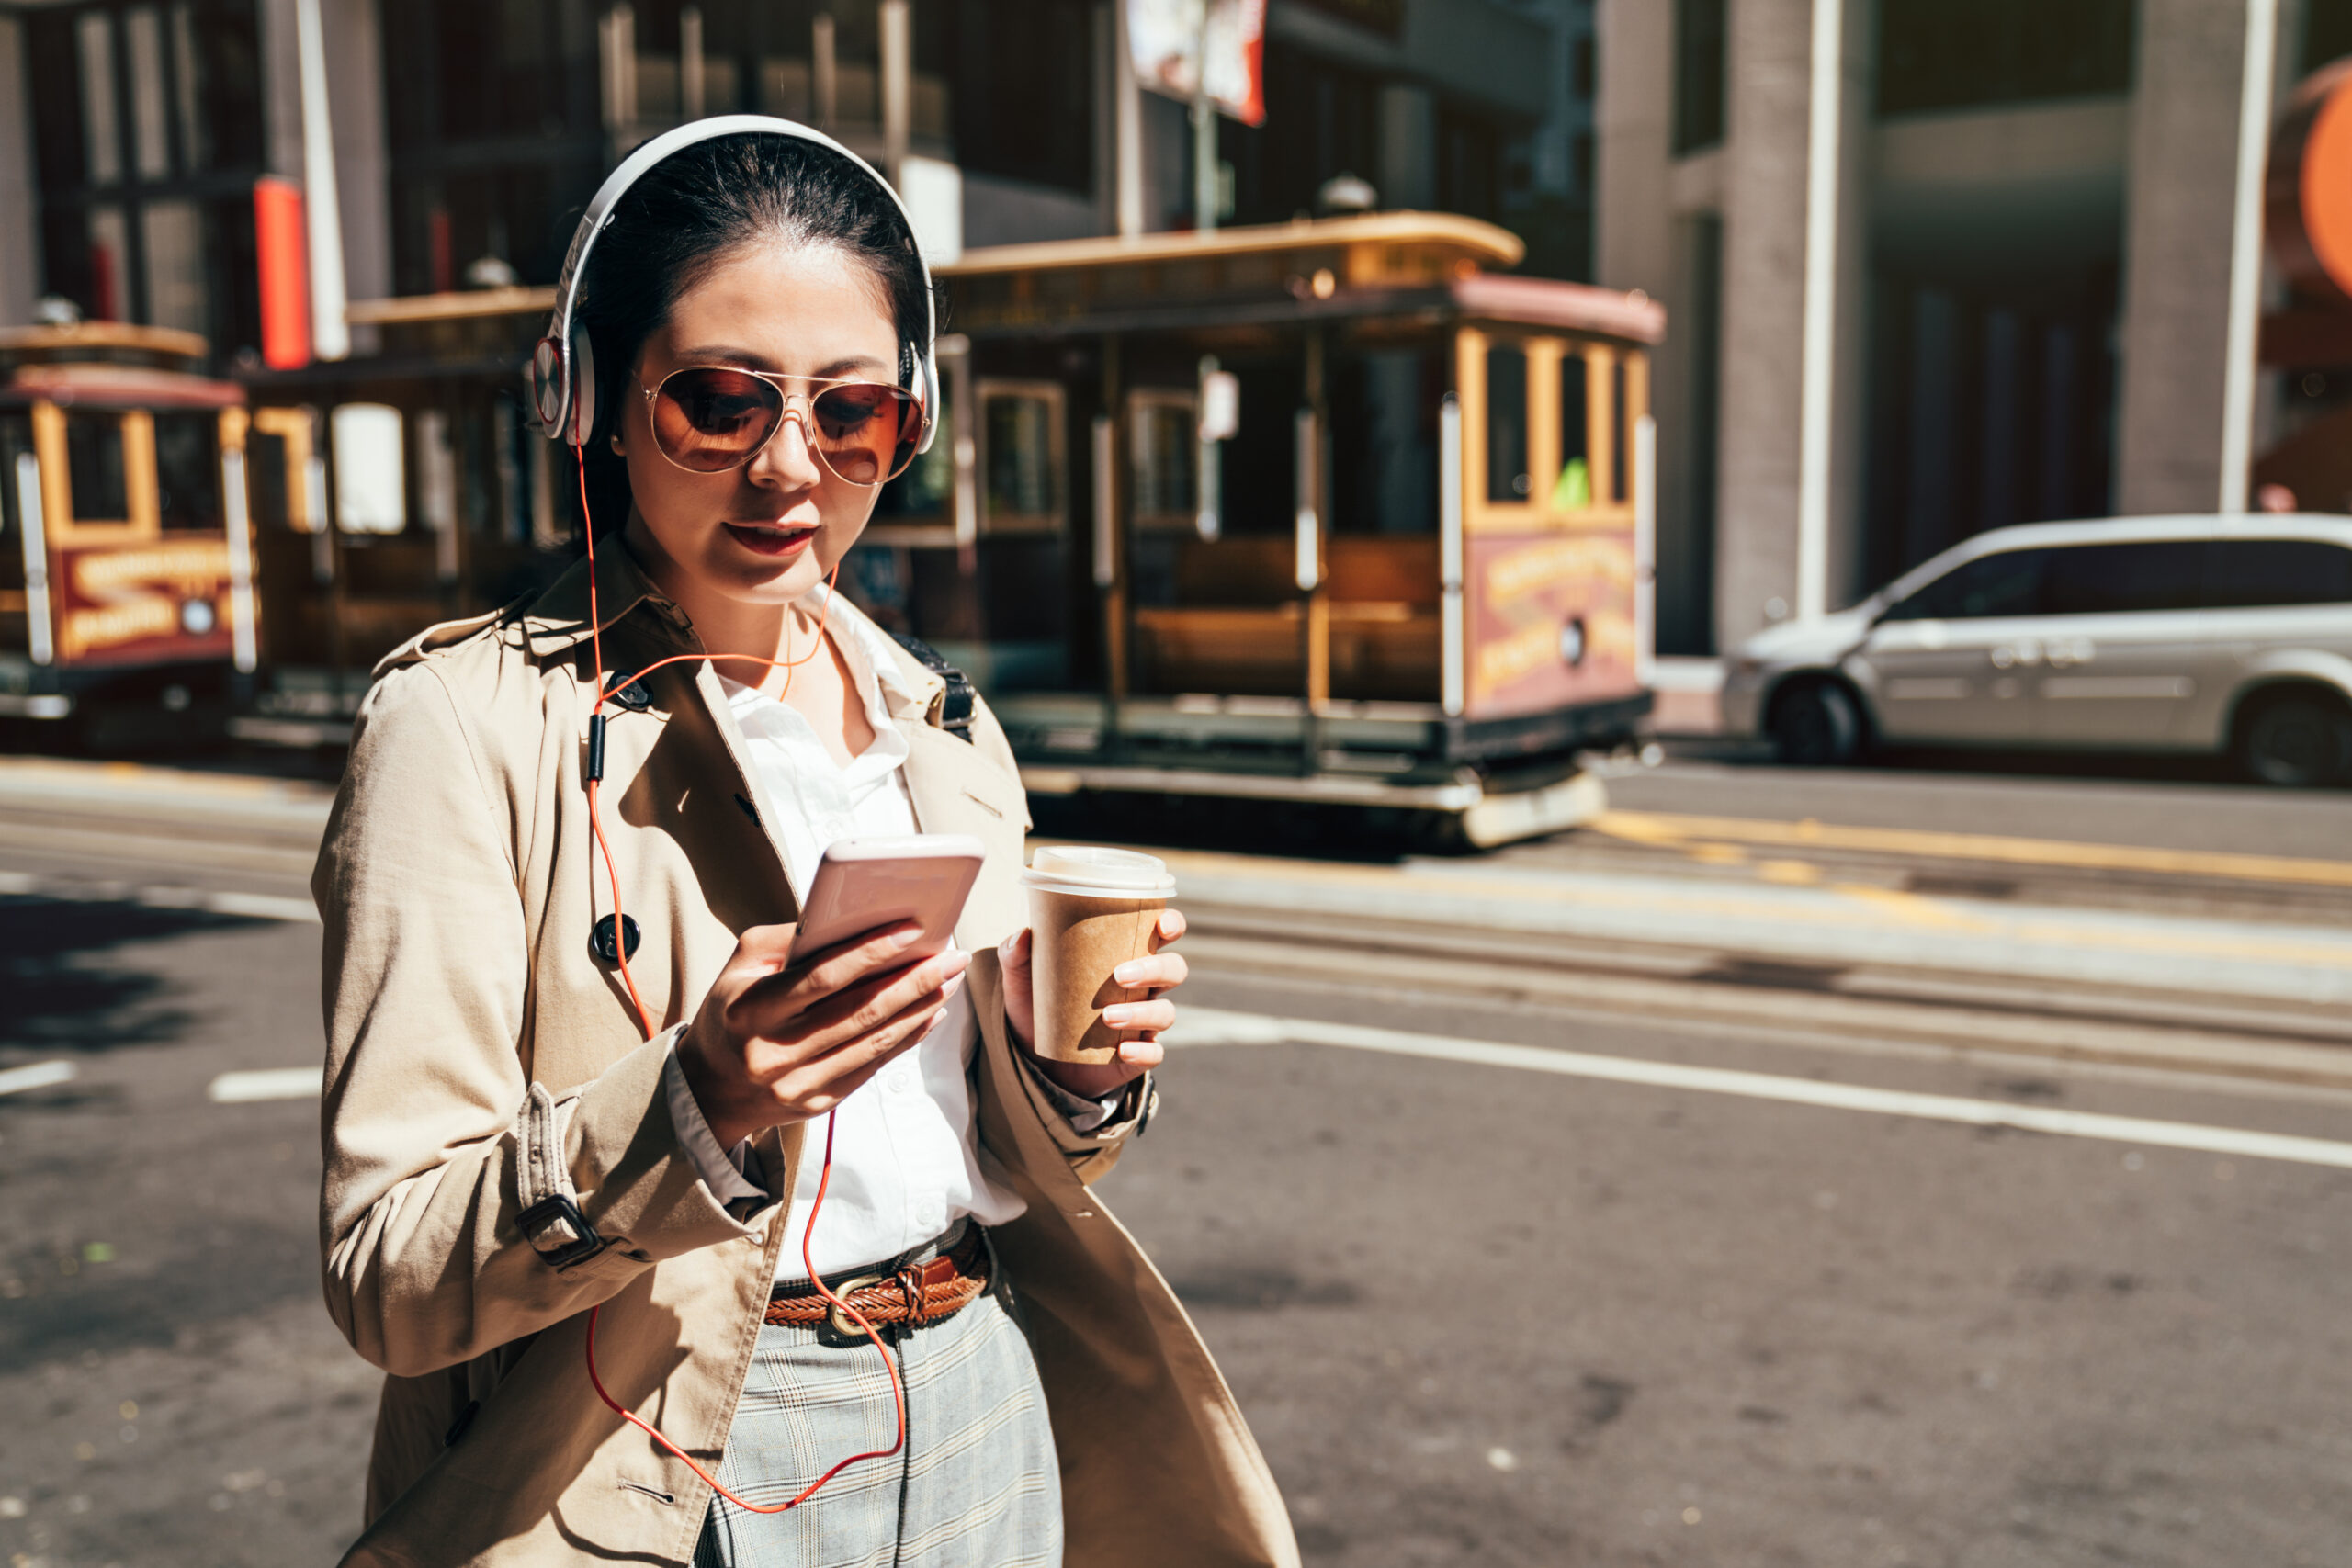 A woman walks on a street, wearing headphones, sunglasses, and holding a coffee cup and phone, with a cable car in the background.